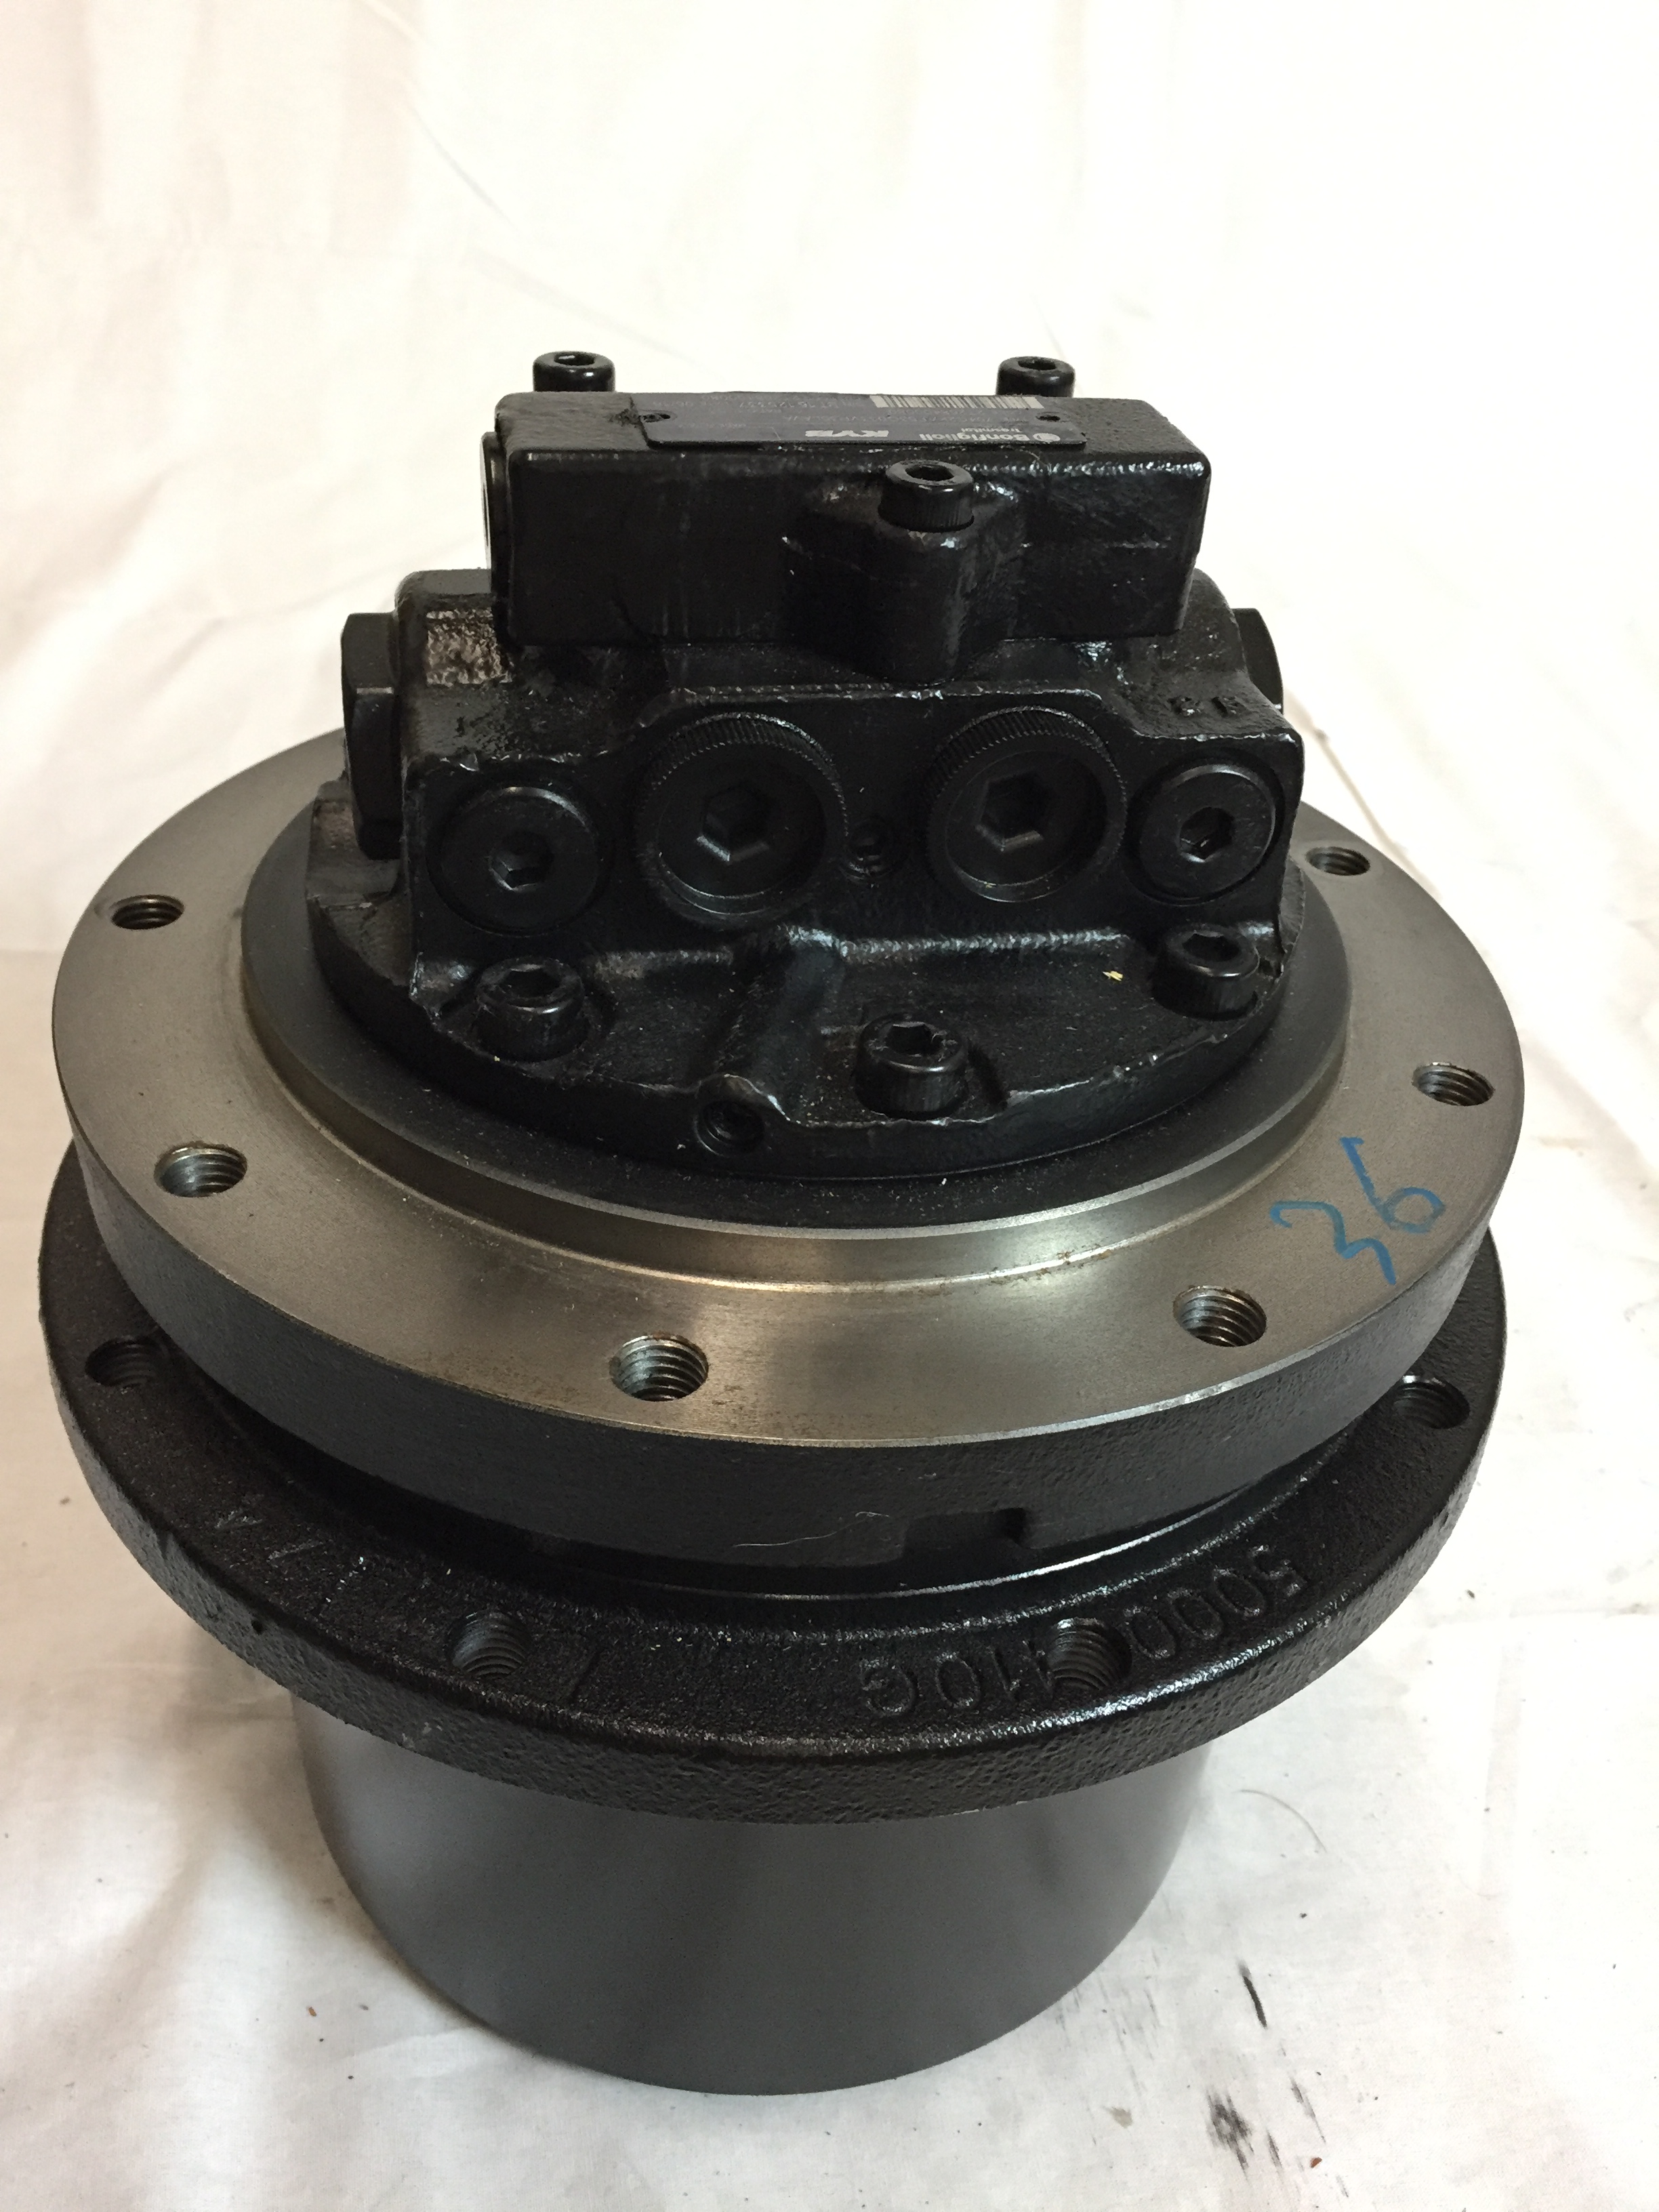 50D Complete Final Drive (Planetary/Travel Drive) with Motor (LOW S/N 244001-274999) #4628892,0922101